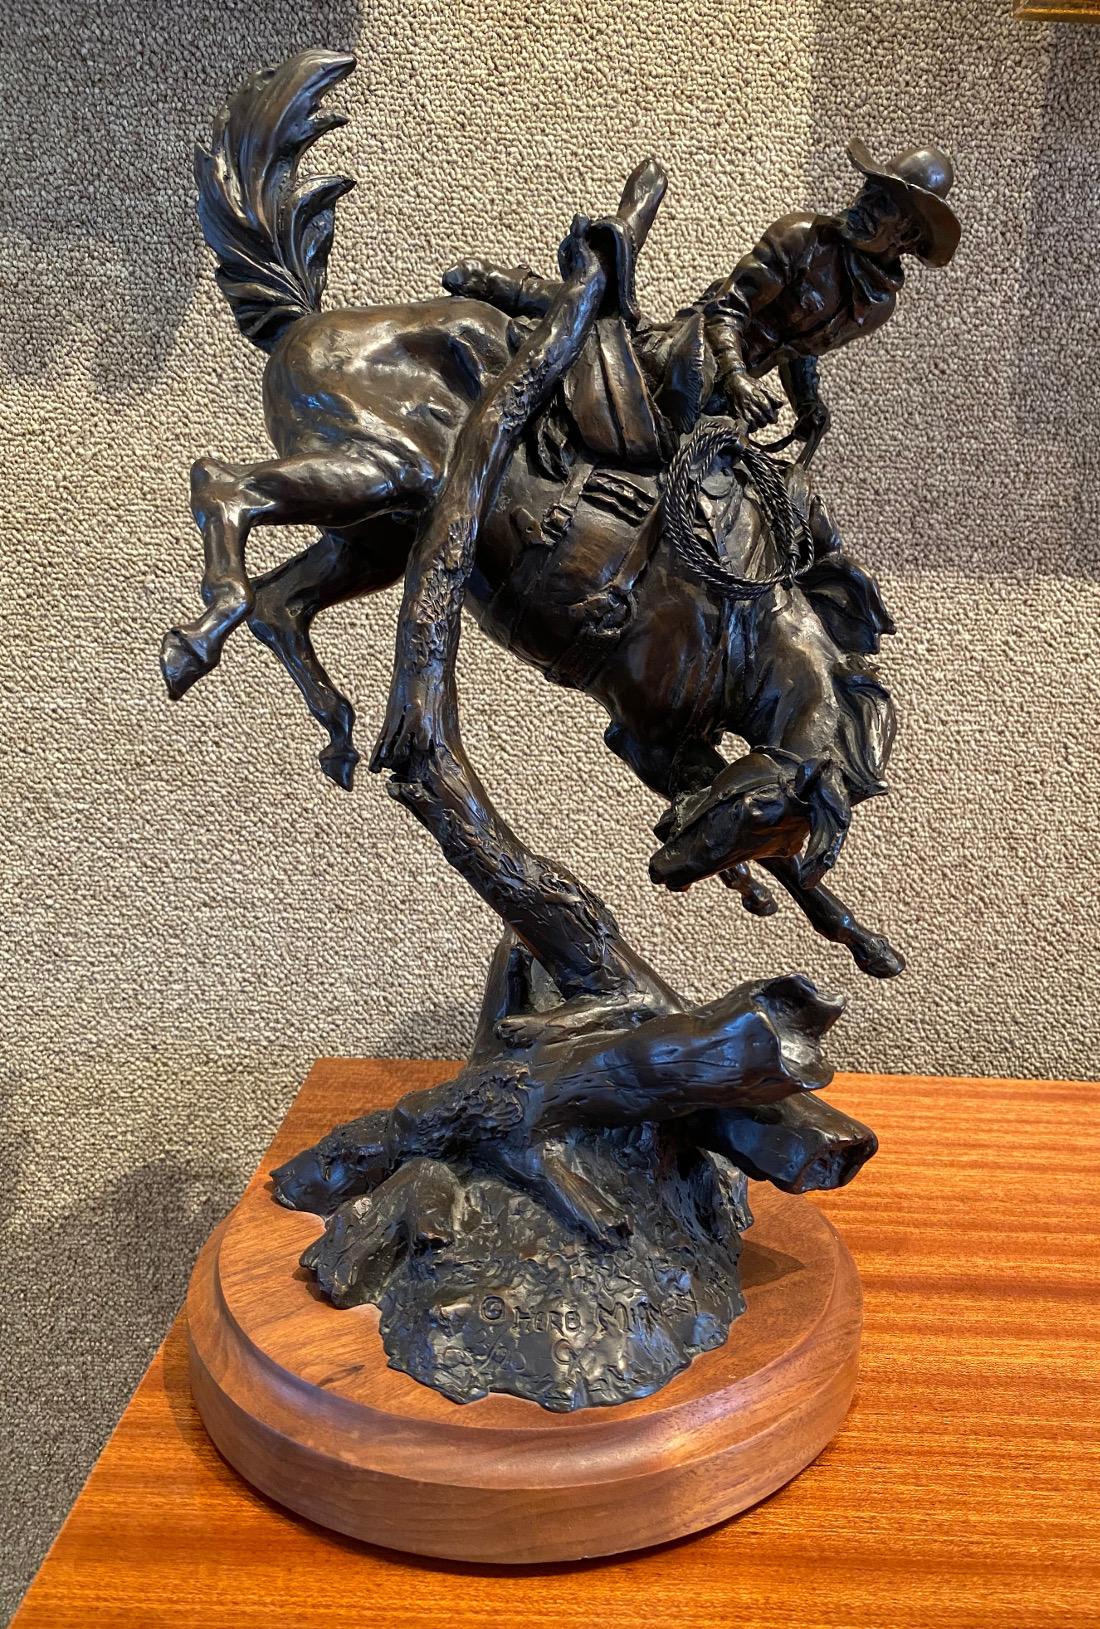 Herb Mignery Figurative Sculpture - 'HUNG UP AND IN TROUBLE"  COWBOY BRONC WESTERN BRONZE COWBOY ARTIST OF AMERICA